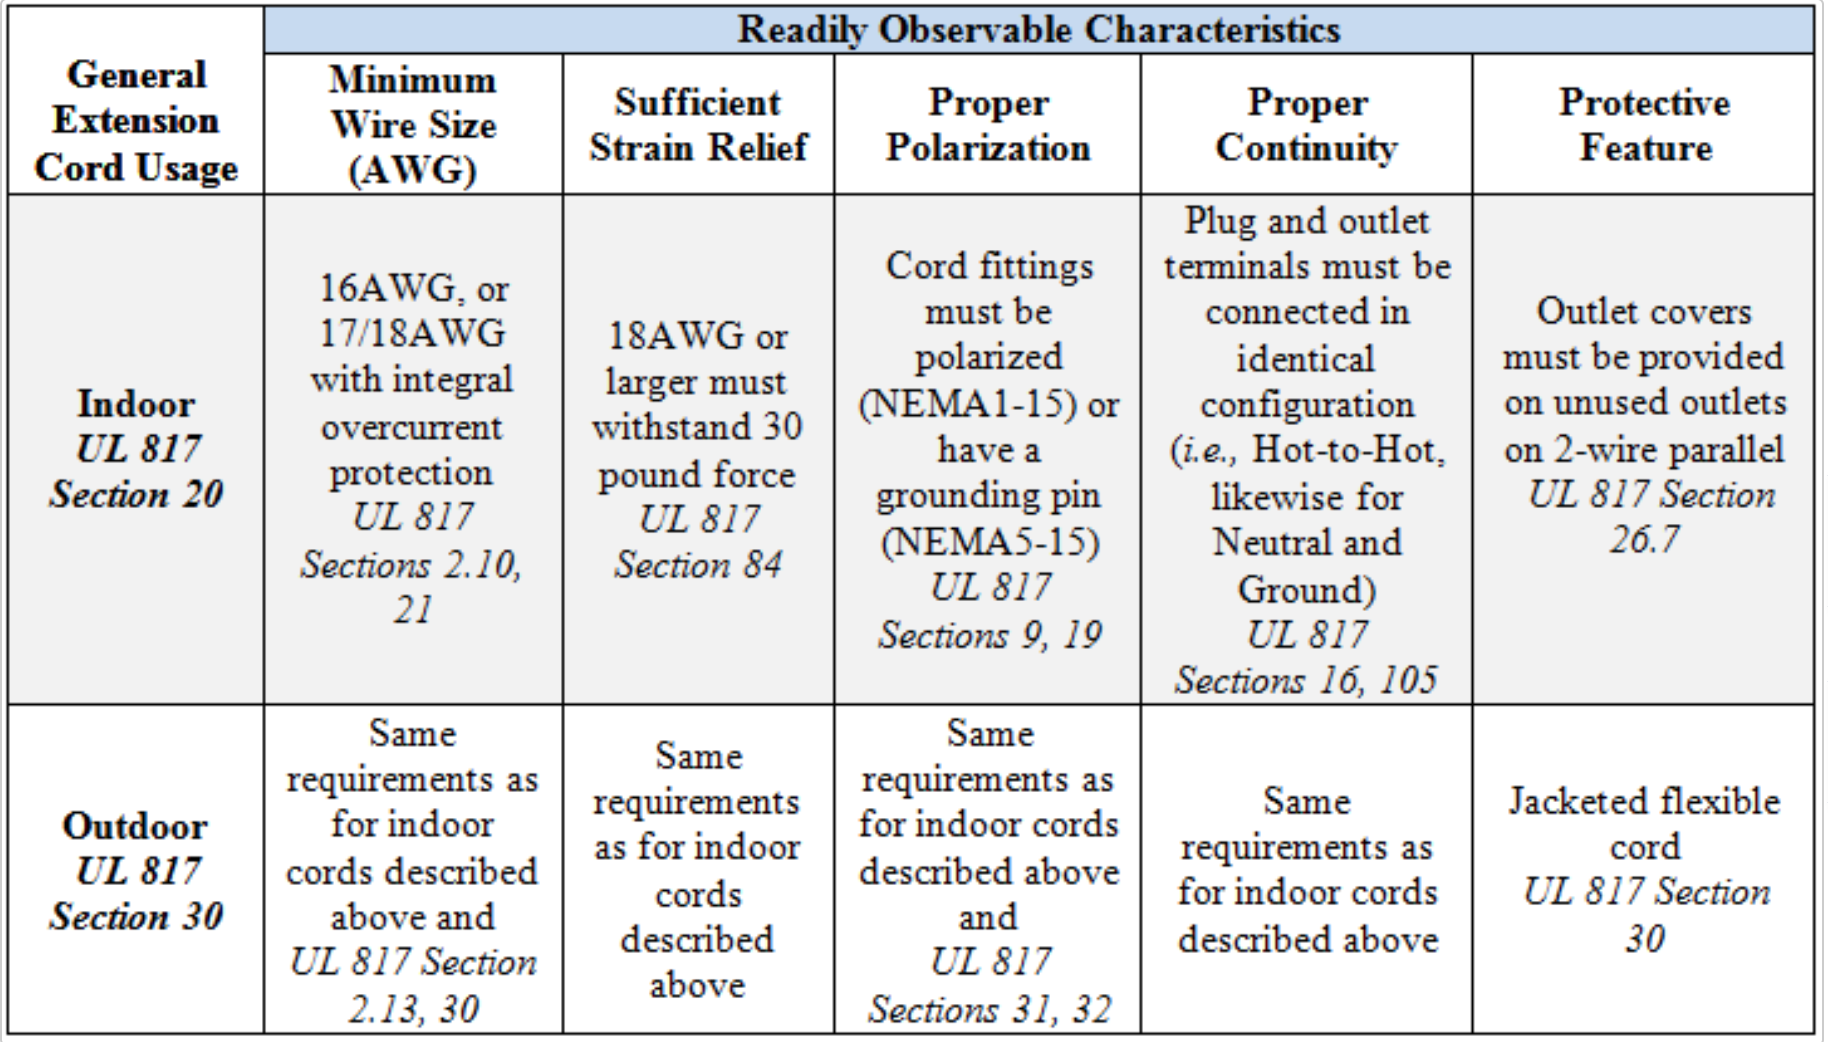 Readily Observable Characteristics for Extension Cords